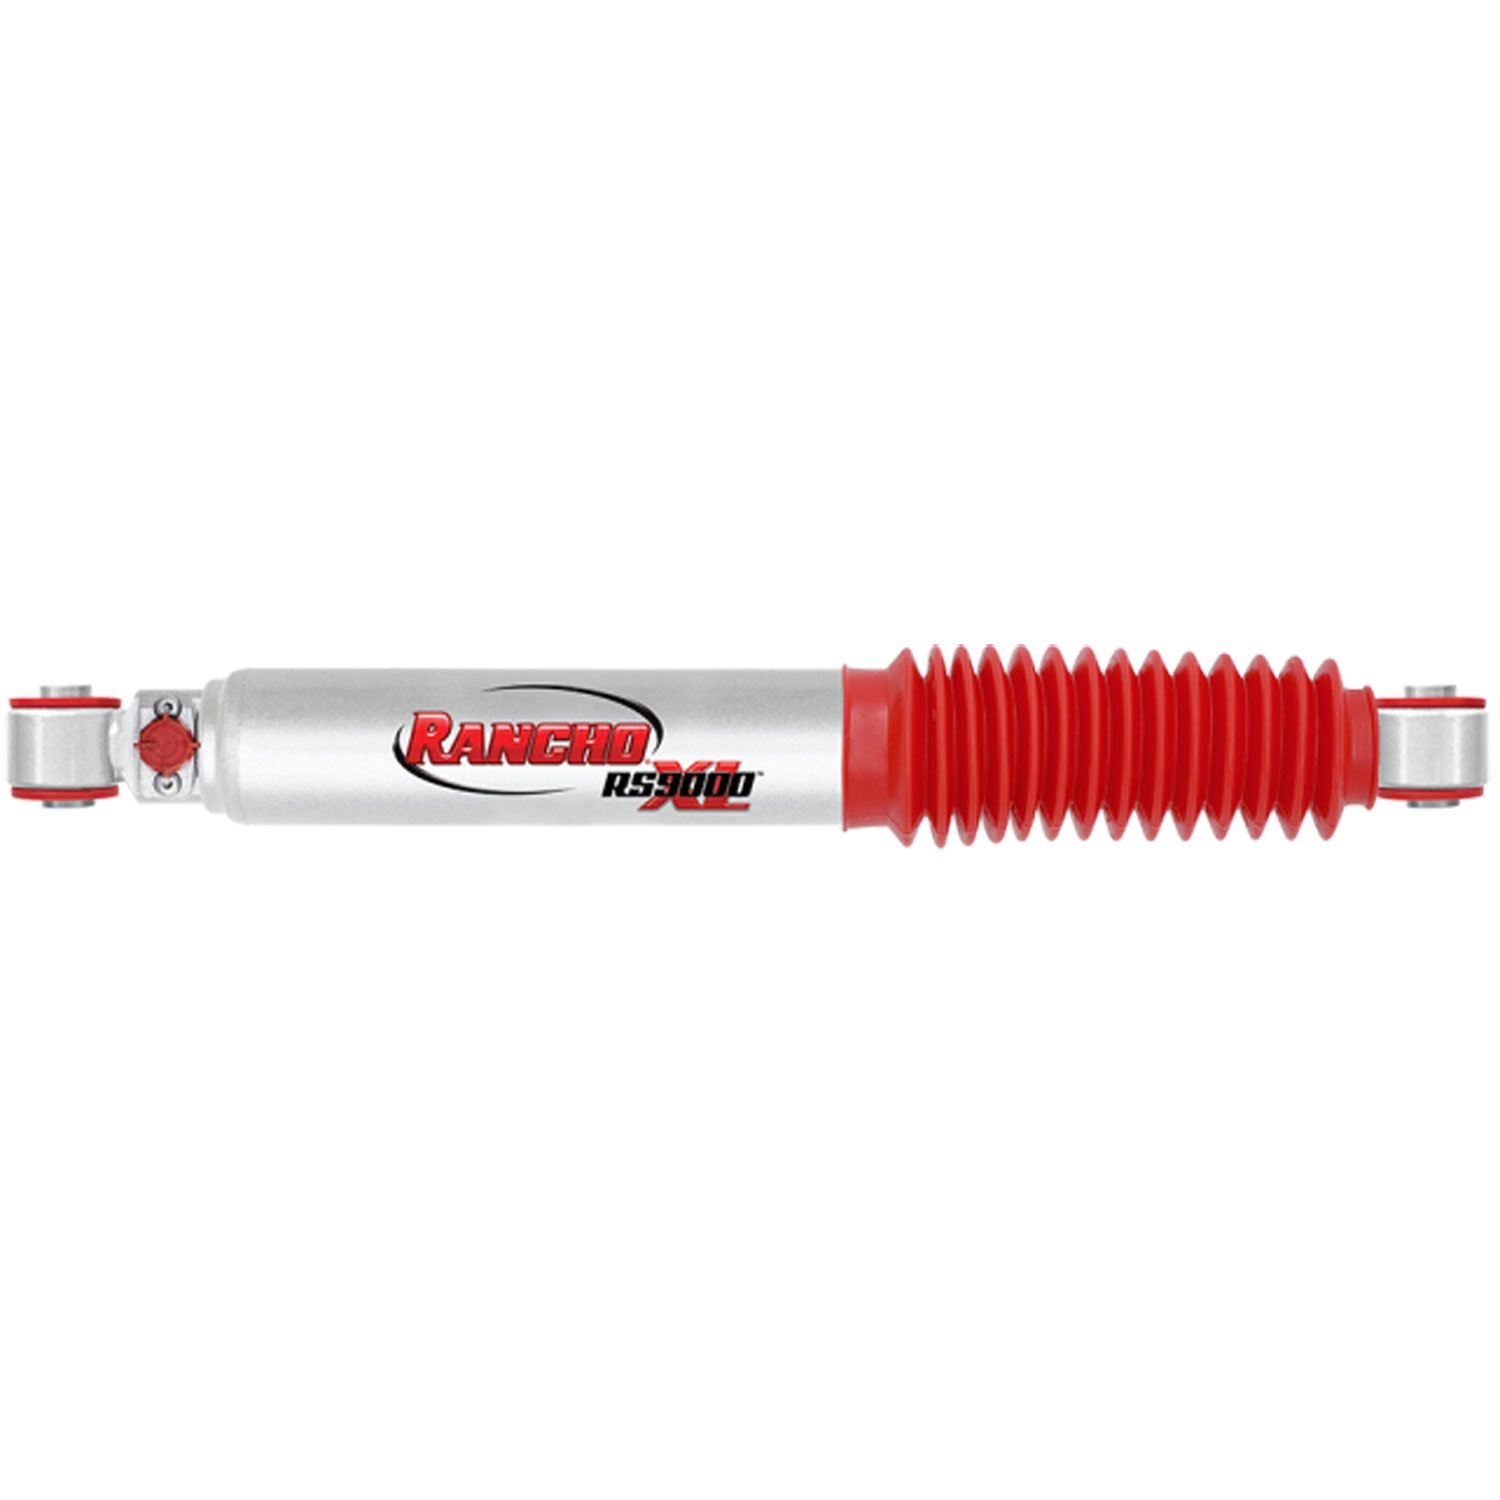 RS9000XL Front Shock Absorber Fits Cadillac Escalade, GM Fullsize Pickups and SUVs